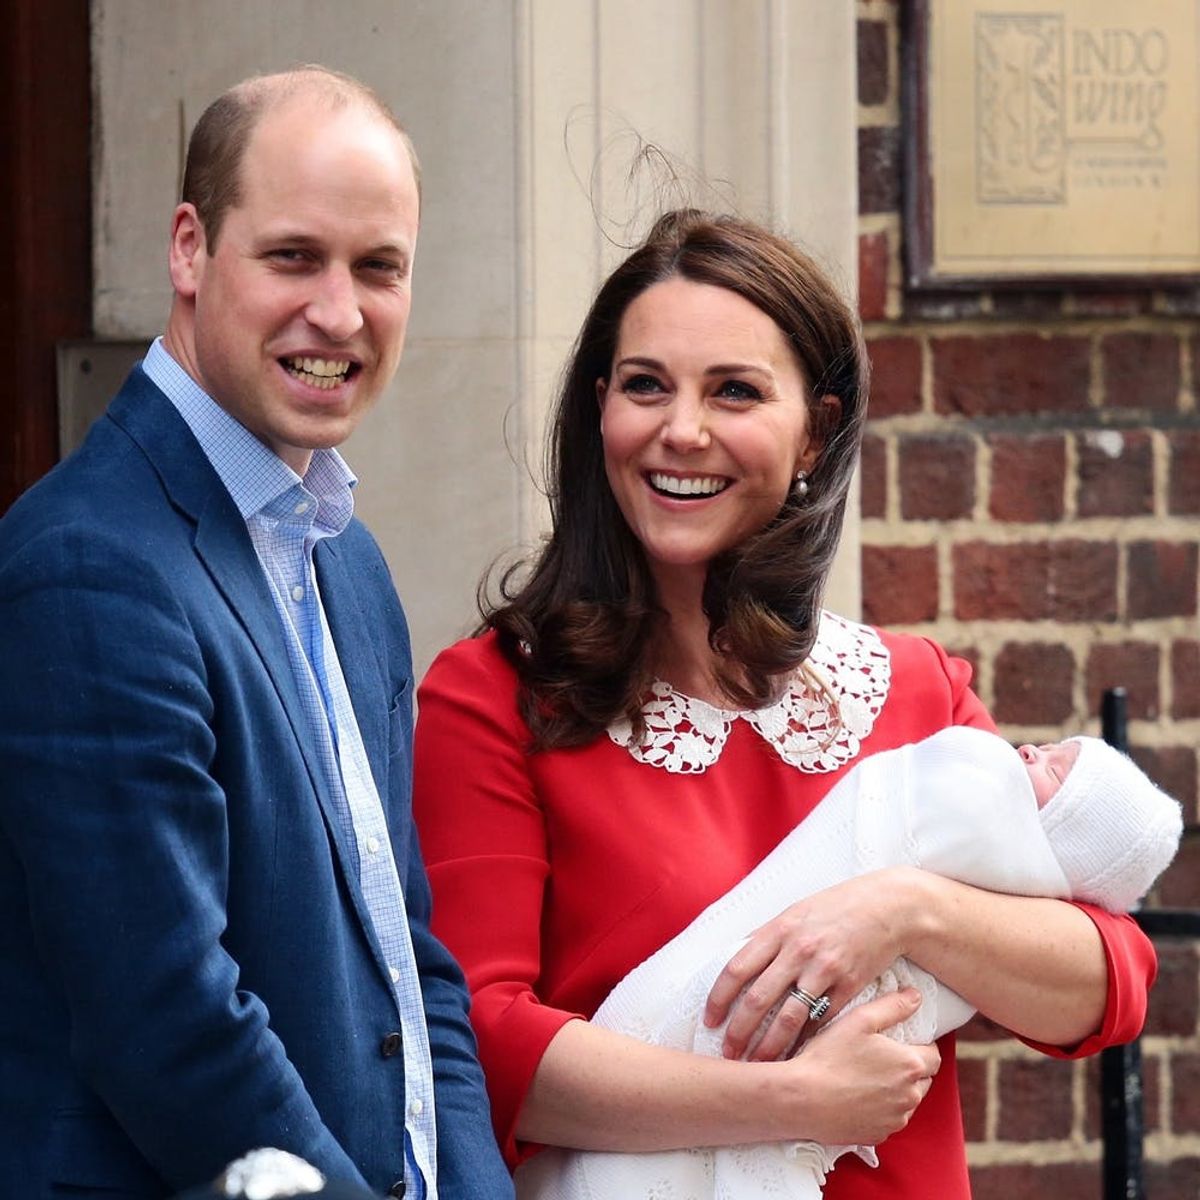 The Typical American Birth Costs More Than the Royal Baby’s